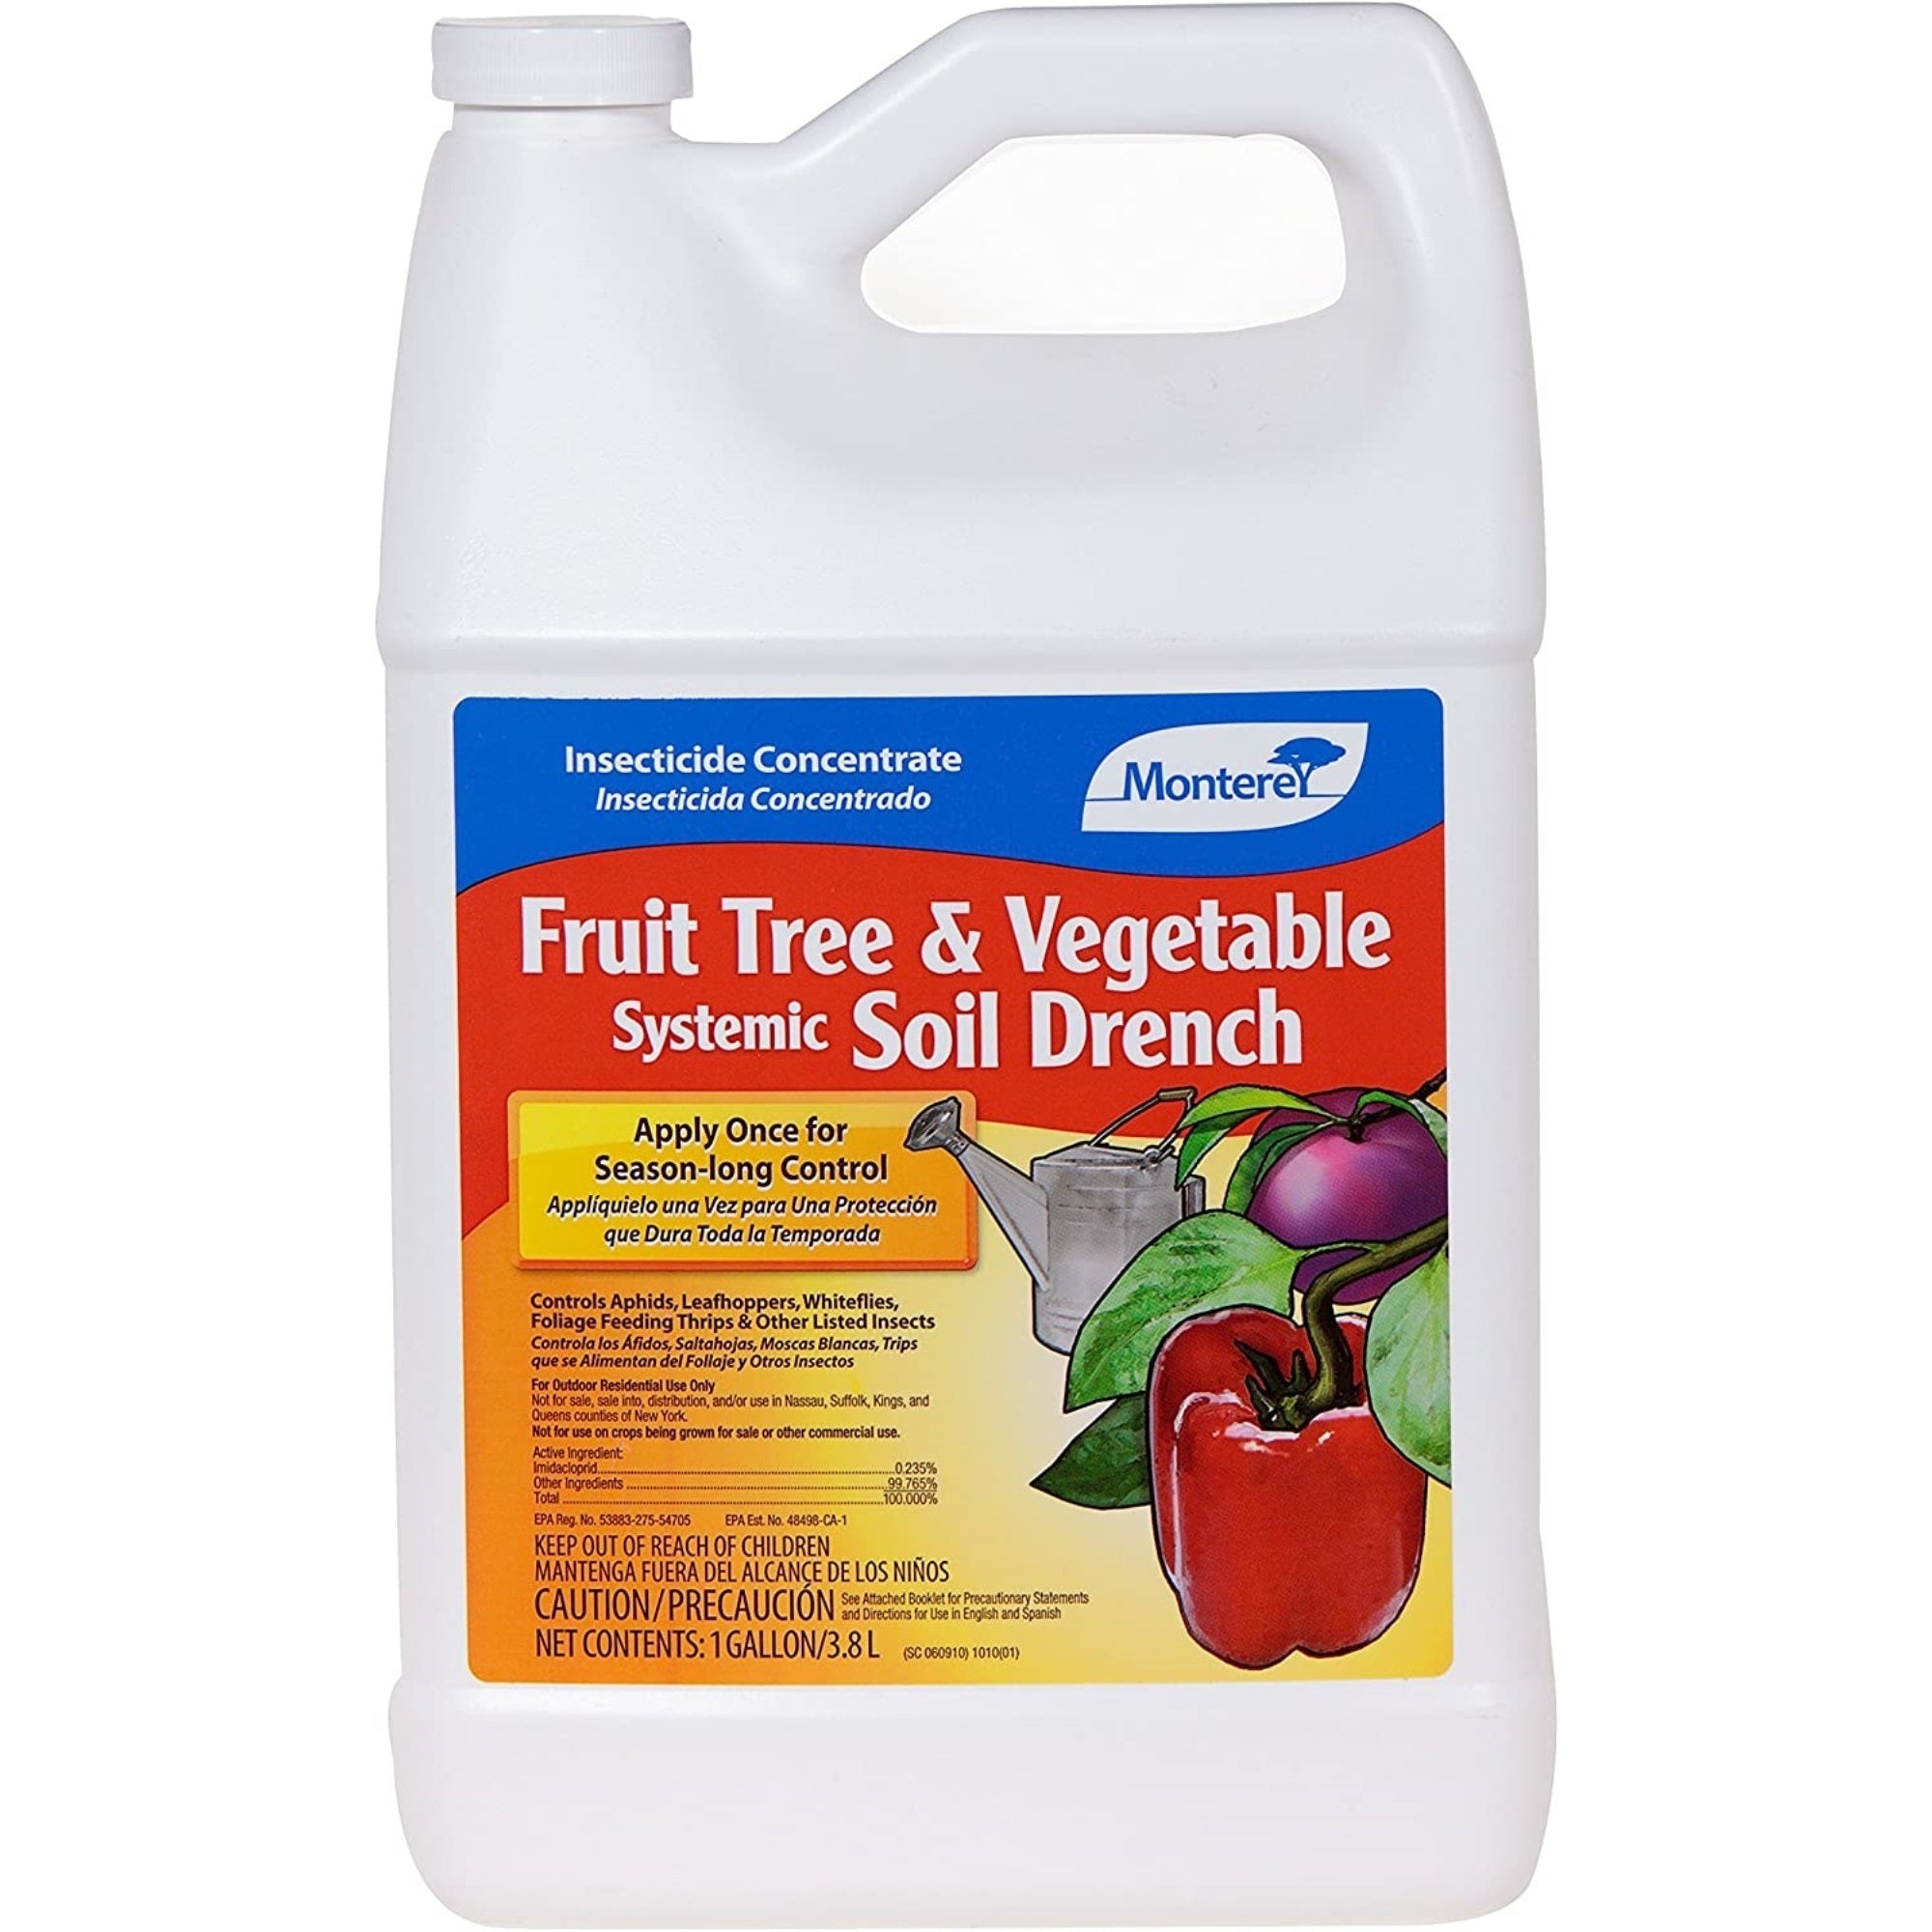 Monterey Fruit Tree & Vegetable Systemic Soil Drench Insecticide Concentrate, 1 Gallon